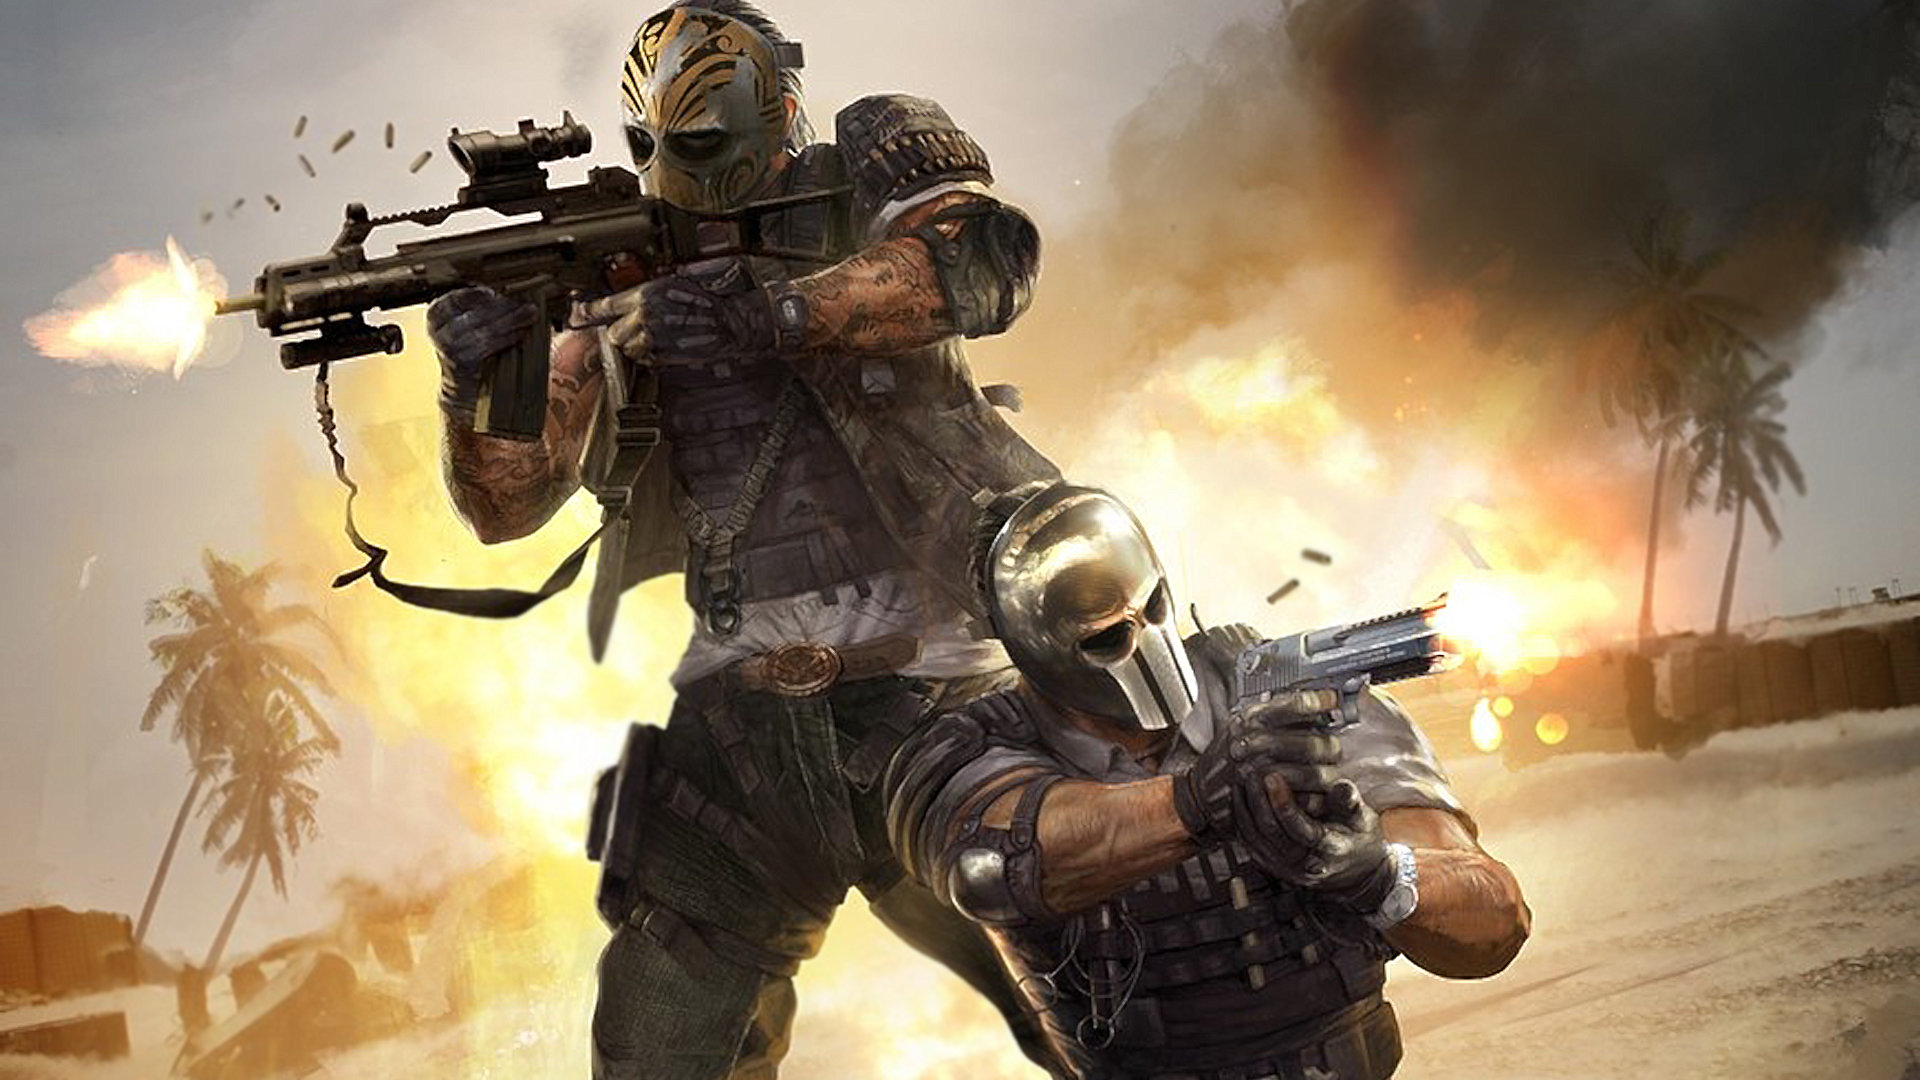 Download hd 1920x1080 Army Of Two: The Devil's Cartel PC wallpaper ID:445279 for free